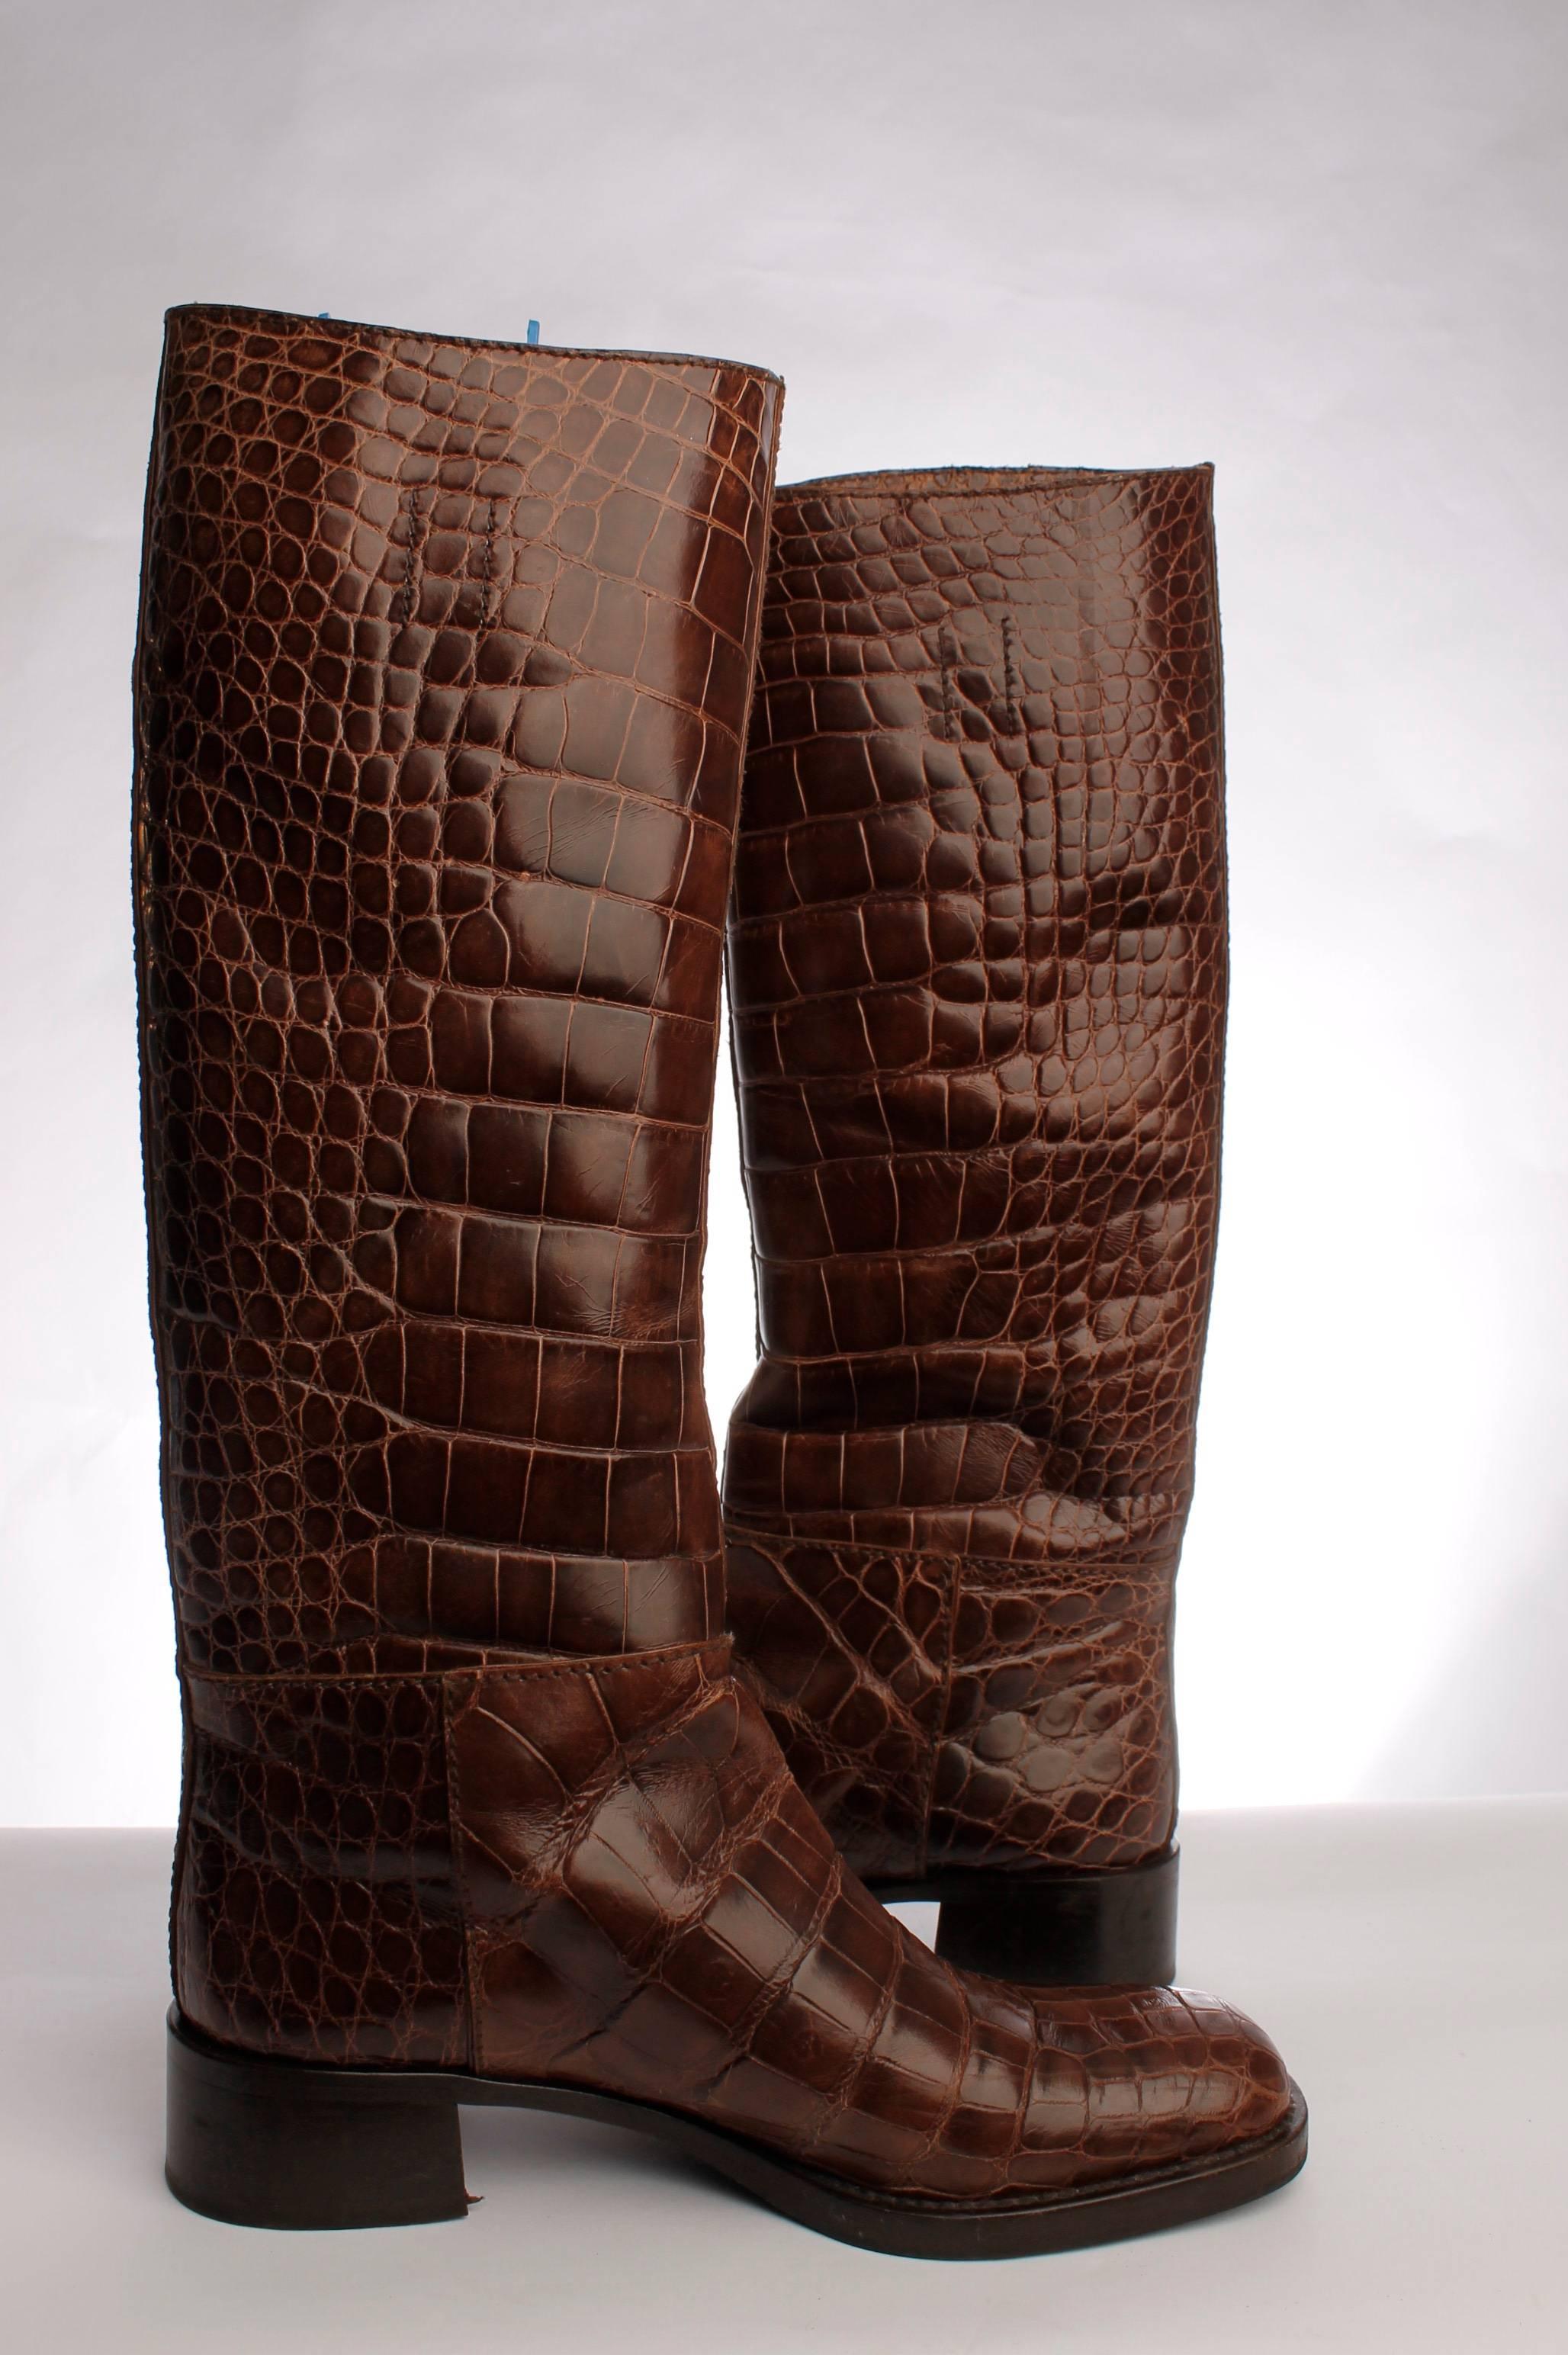 

Knee length Prada boots in dark brown crocodile leather, a slightly square toe and a cuban heel of 4 centimeters high. Beautiful, stylish and the trend for coming winter!

The shaft measures about 39 centimeters and has no zipper or elastic.